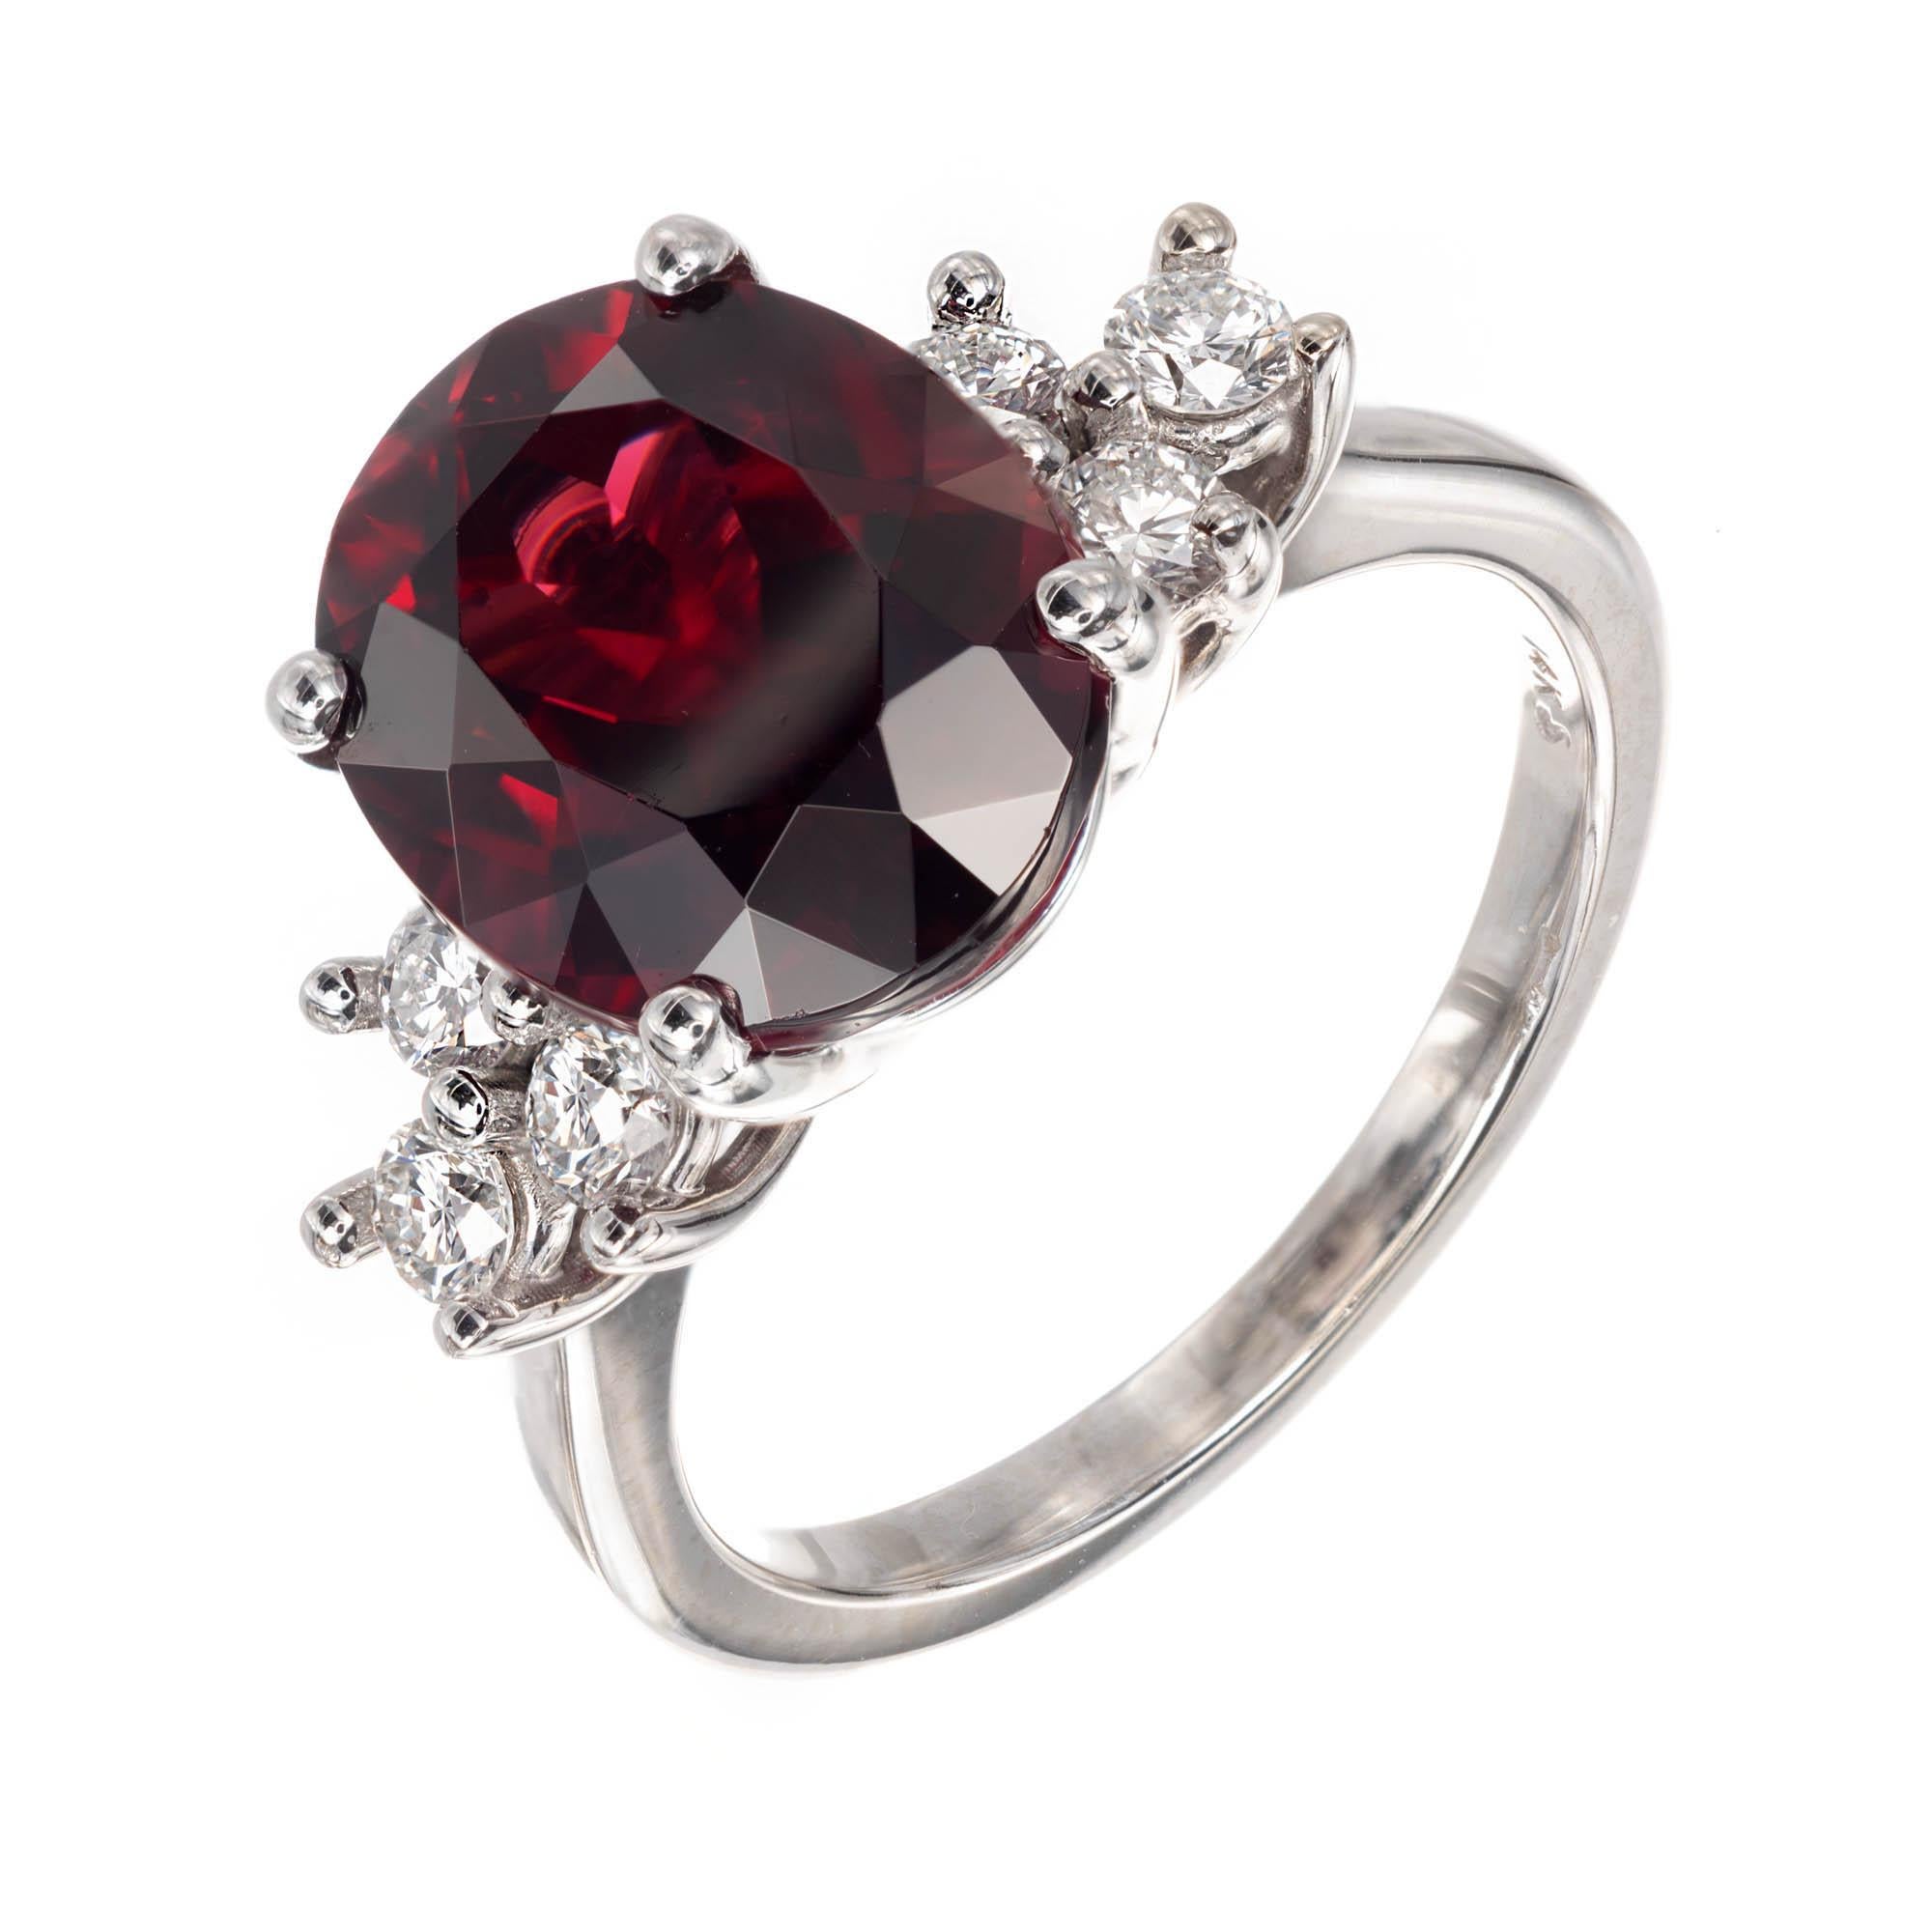 Garnet and Diamond engagement ring with deep red Pyrope Almandine Garnet set in 14k white gold with 3 round brilliant cut Diamonds set on either side.

1 oval Pyrope Almandine deep red Garnet, approx. total weight 6.12cts, 11.99 x 9.87 x 6.78mm, GIA